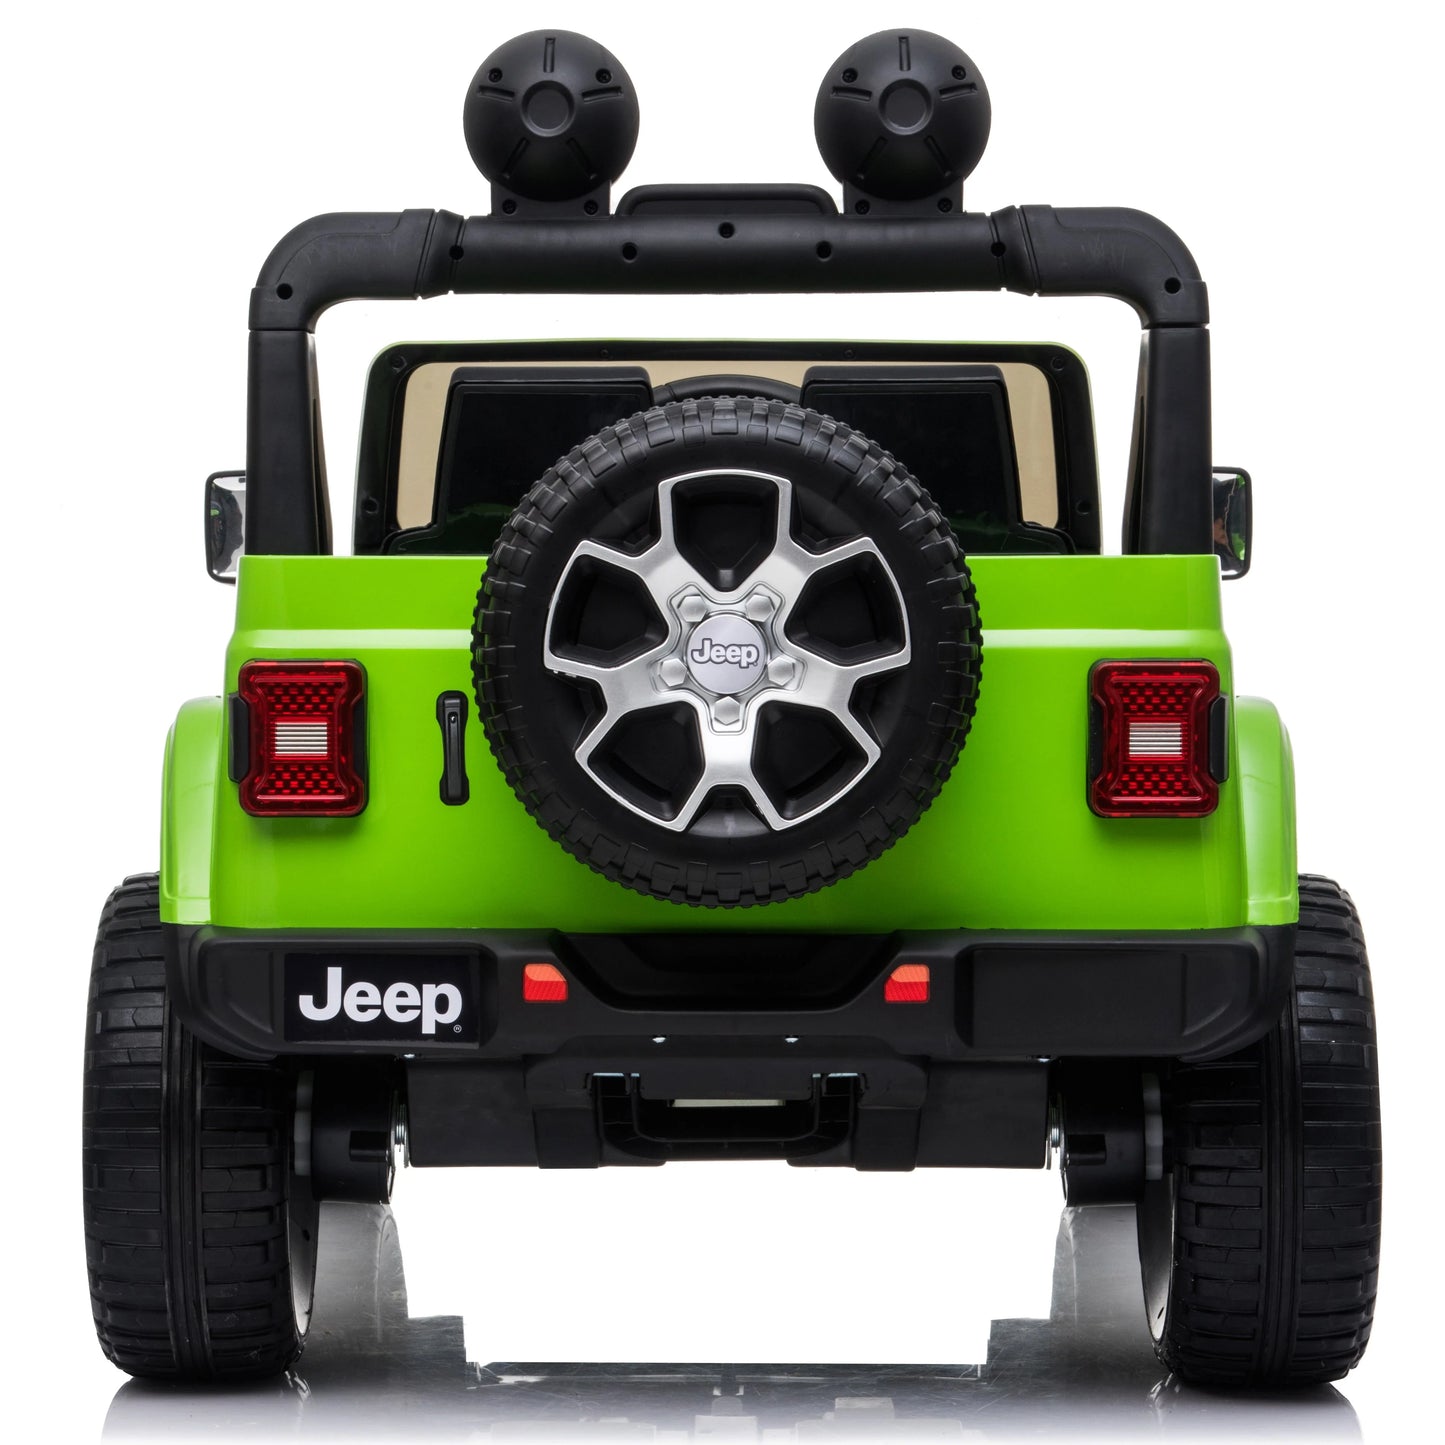 Rear view of a green Rubicon children's ride-on car with spare tire and tail lights, displayed on a white background.